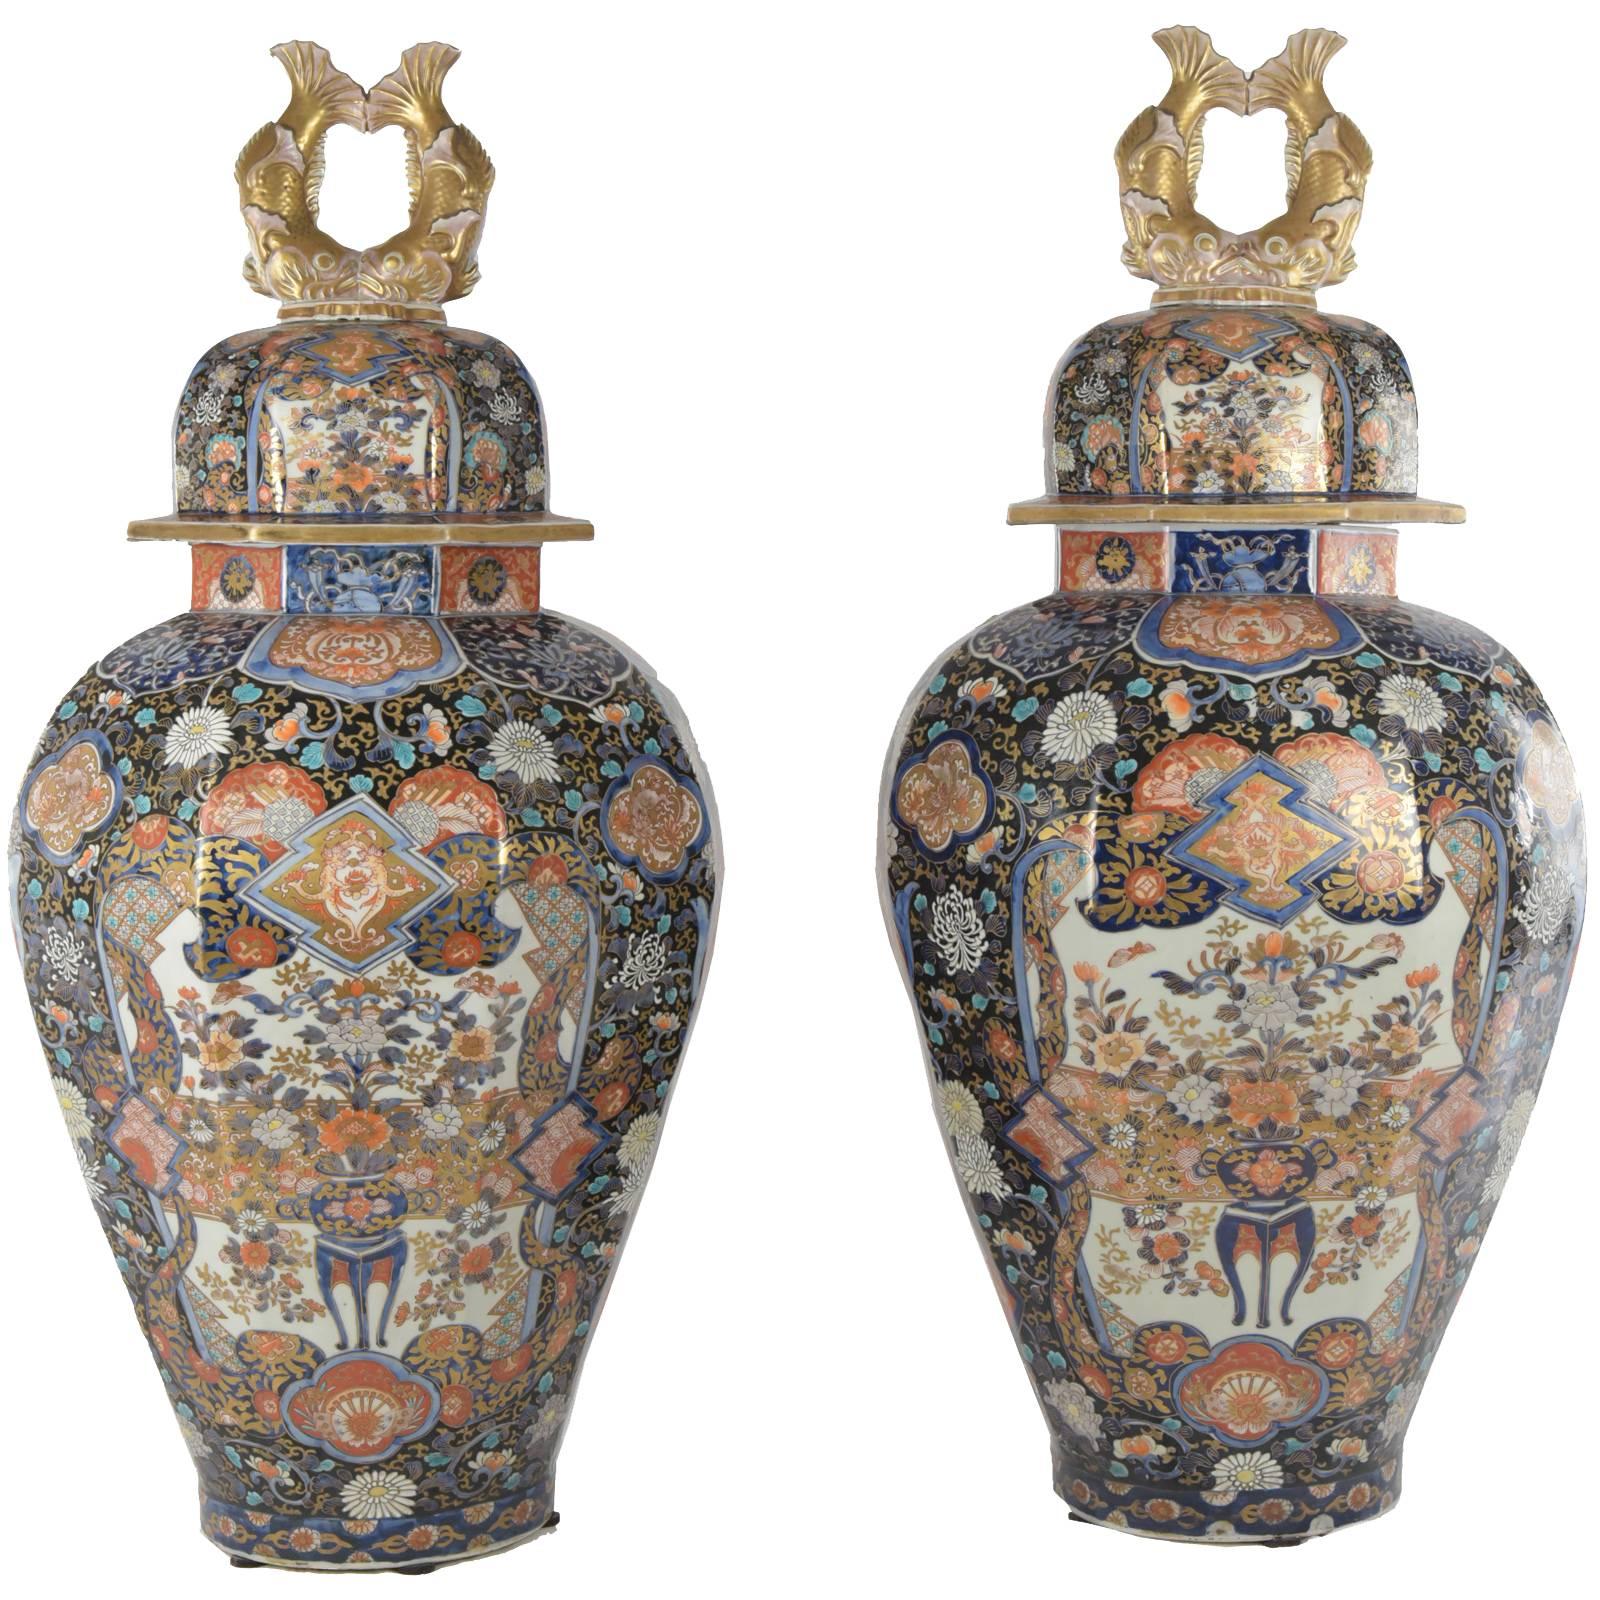 Pair of Imari Vases from the Estate of F.D. Roosevelt